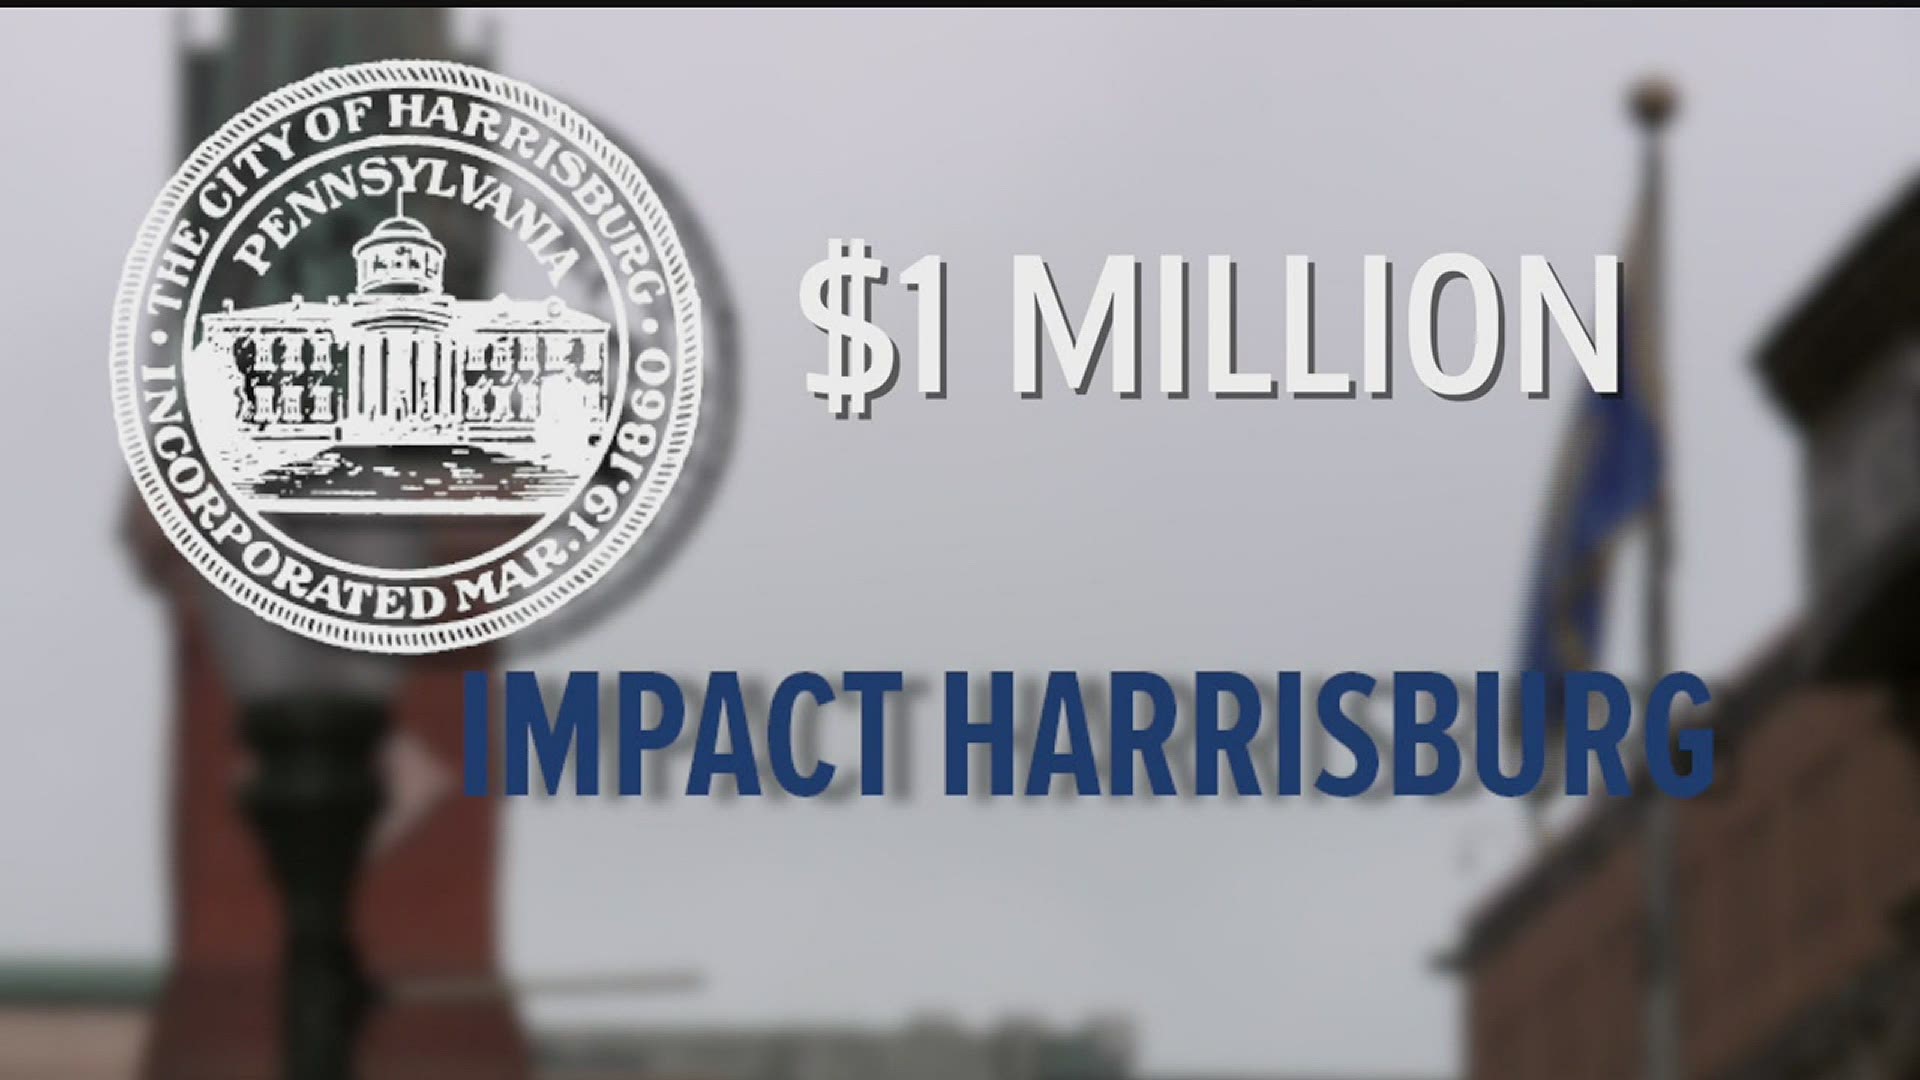 The City of Harrisburg and Impact Harrisburg have created a $1 million grant program aimed at helping small businesses in the city.